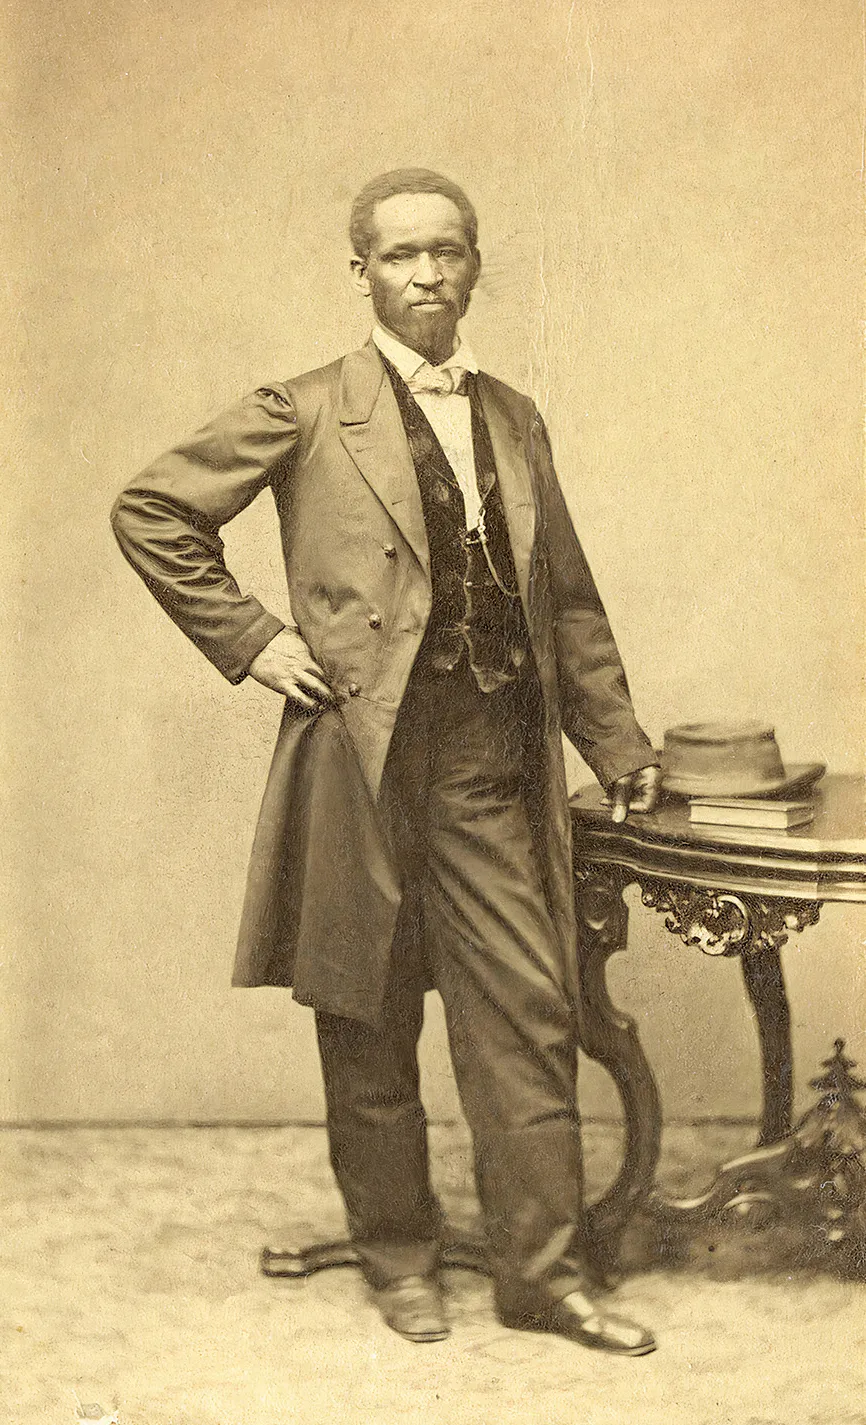 a man in a suit standing next to a table poses for a portait